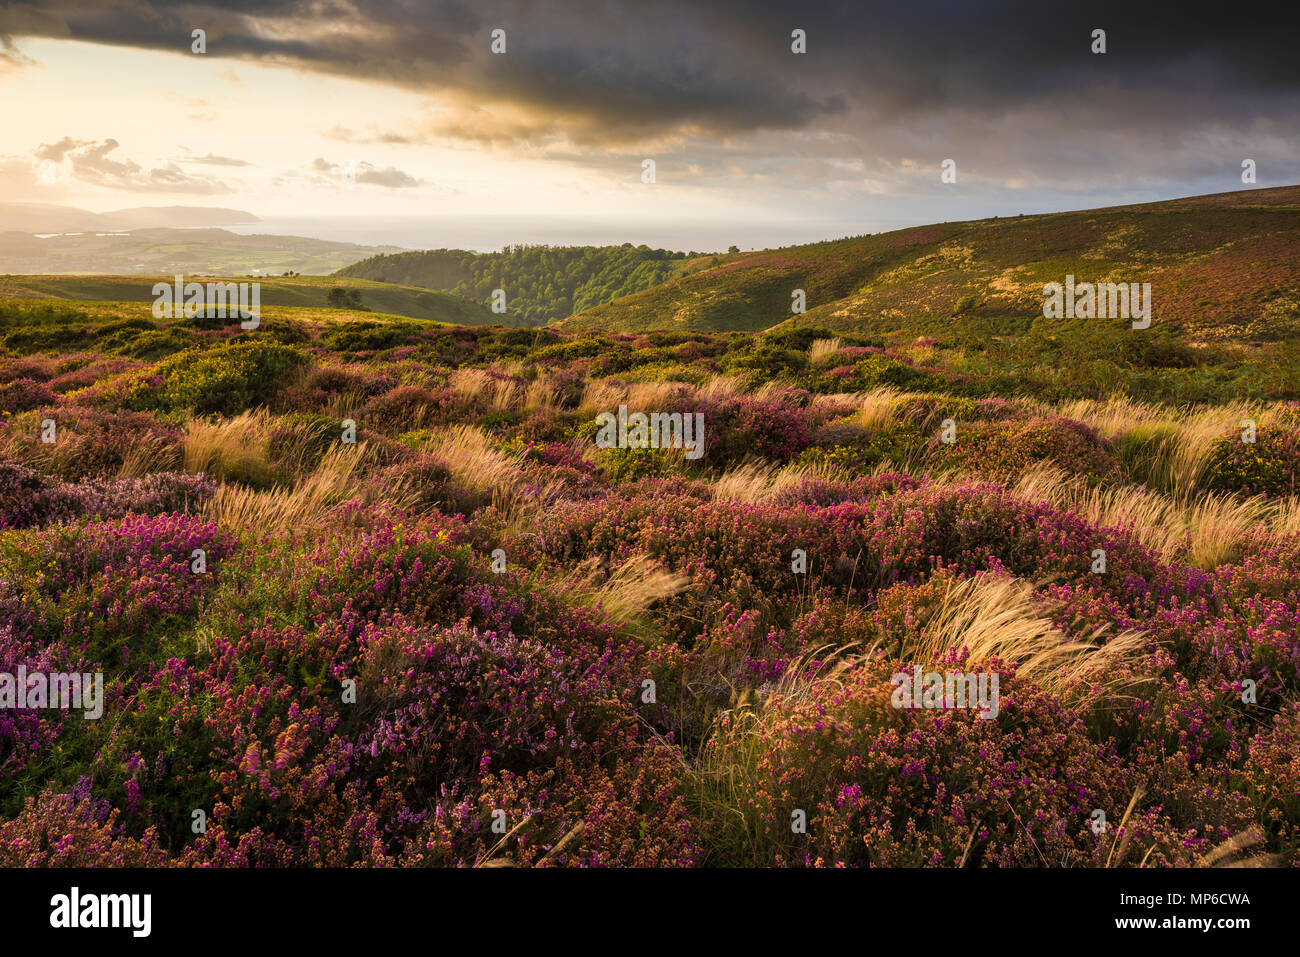 Bell and common heather in flower on Weacombe Hill in the Quantock Hills in late summer. Bicknoller, Somerset, England. Stock Photo